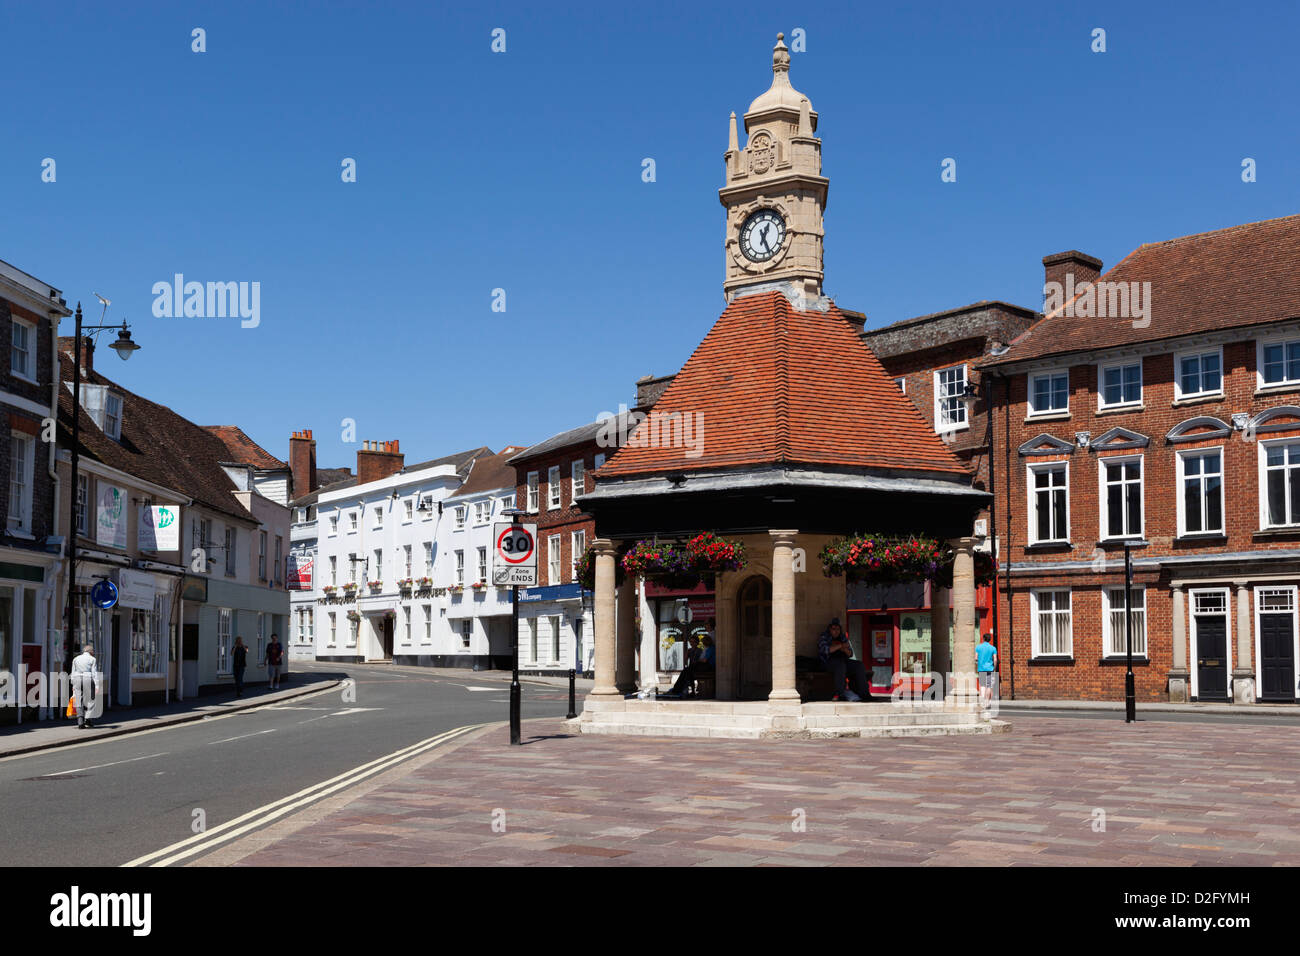 The Clock Tower on Northbrook Street Stock Photo